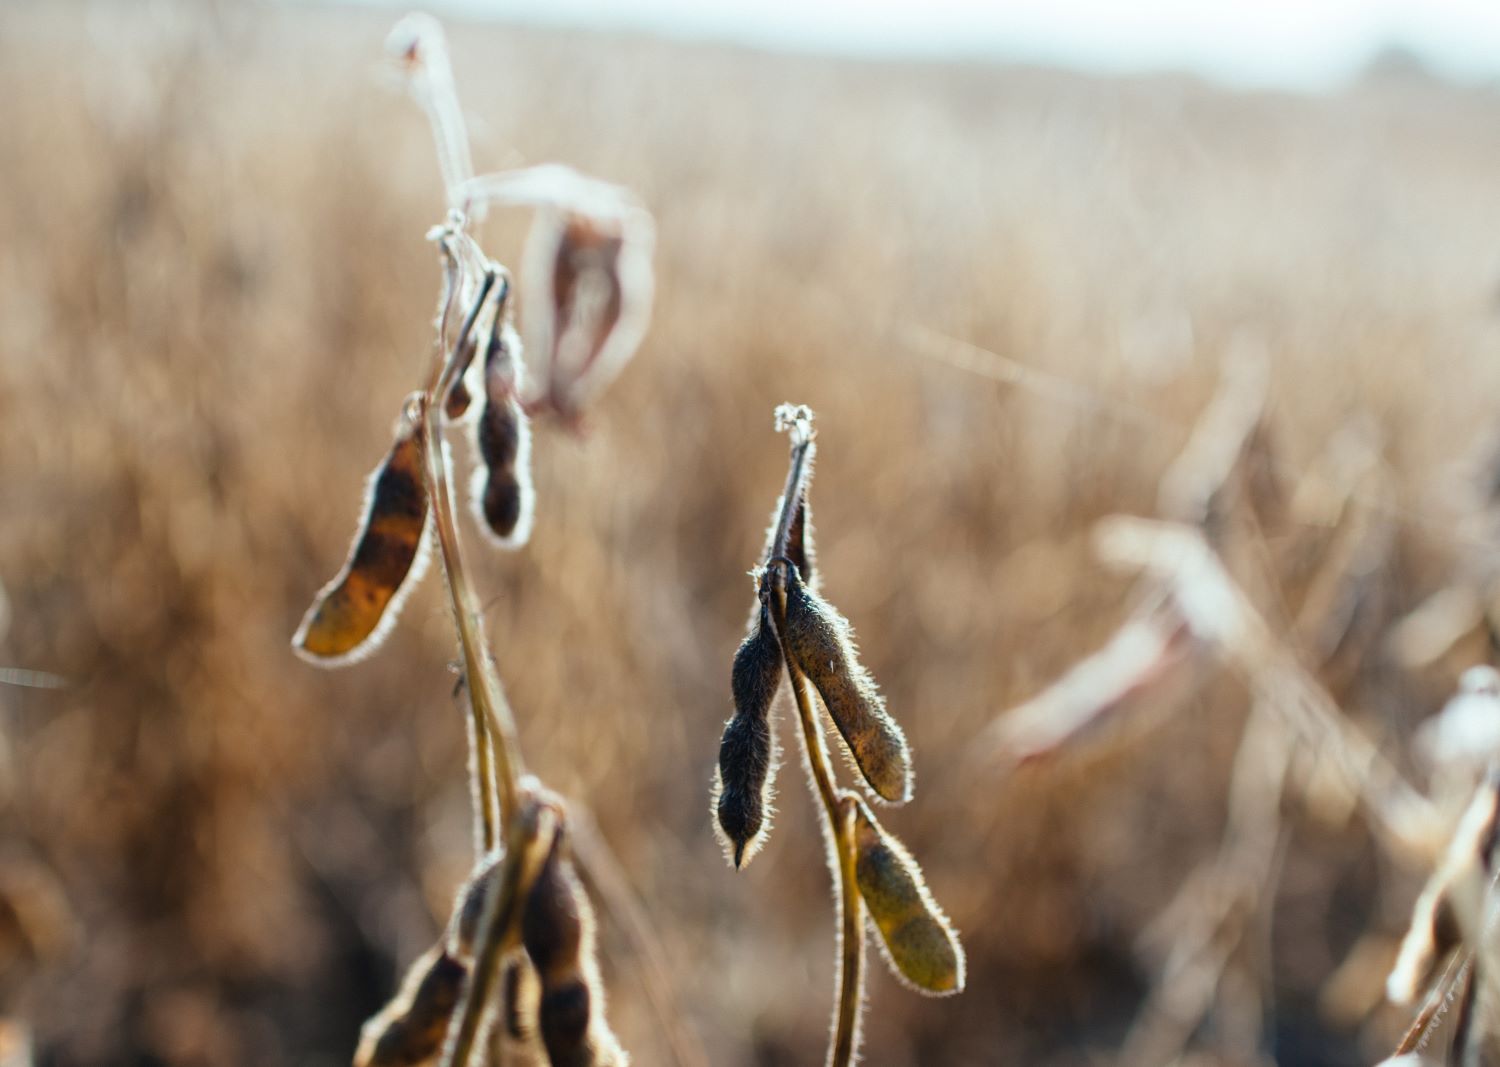 Field of soybeans ready for harvest